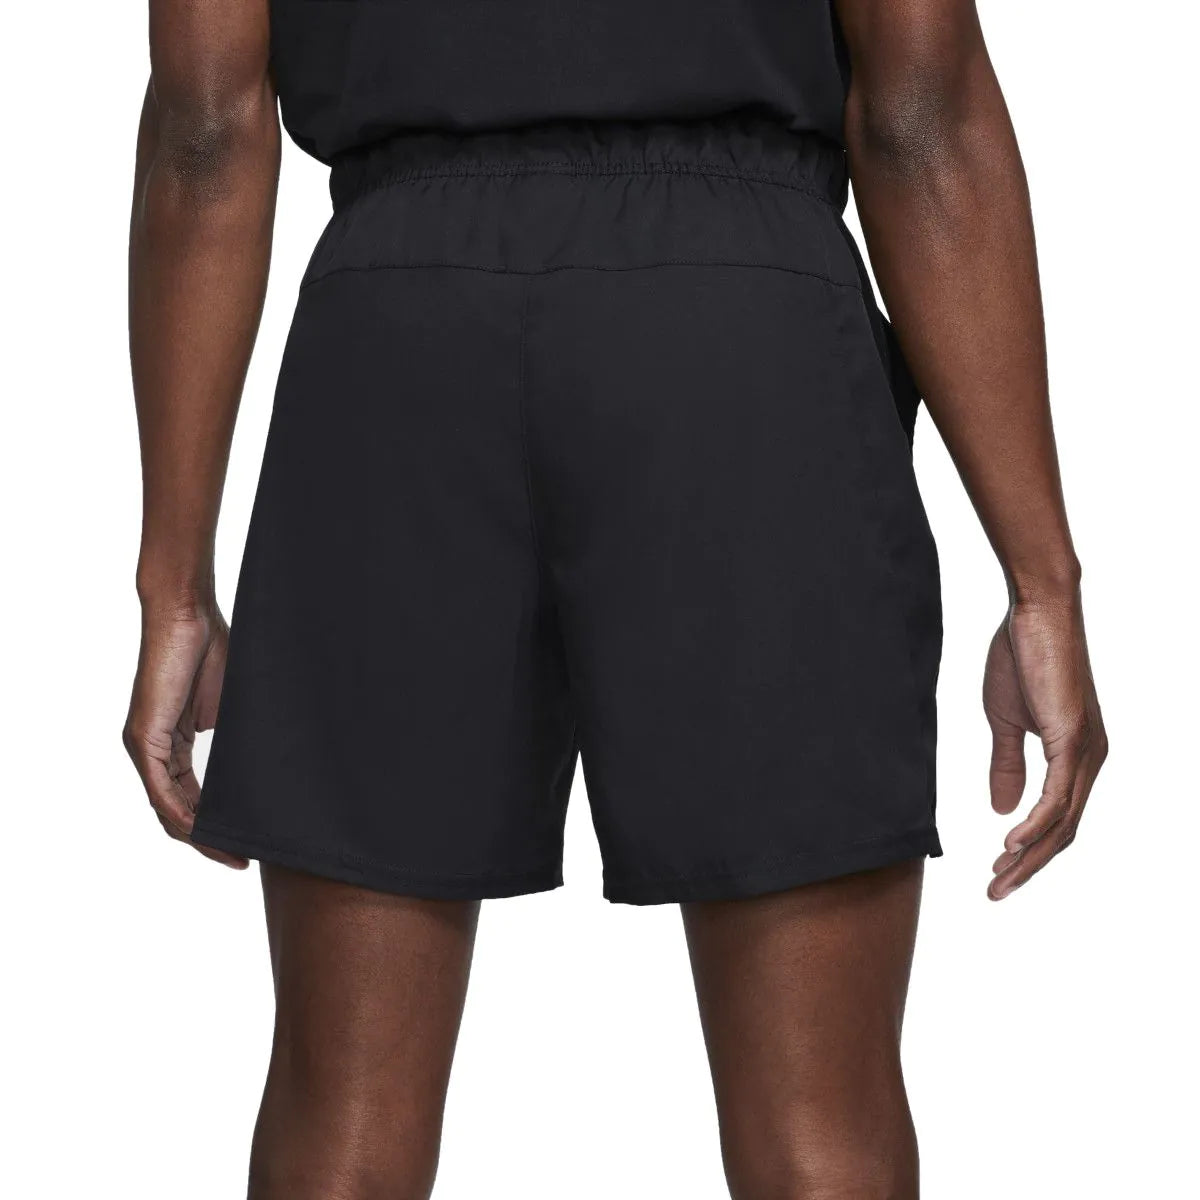 Nike Court Dri Fit Men's Victory 7 Inch Shorts